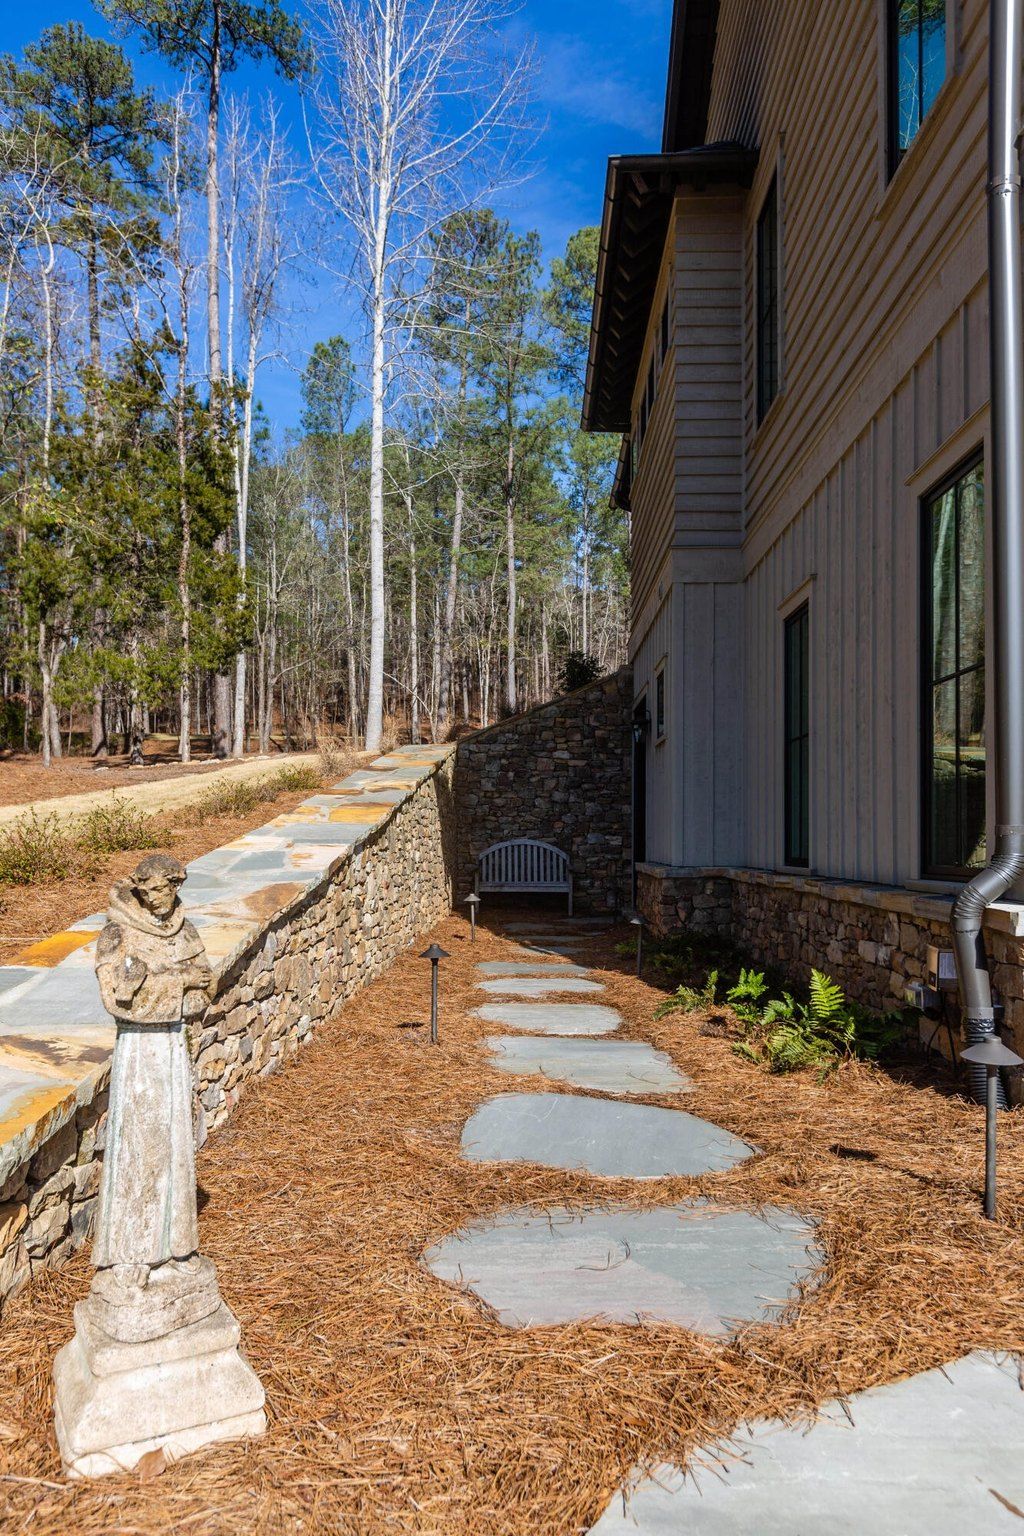 Architectural marvel experience ultimate lake living in this alabama gem by mitch ginn 83